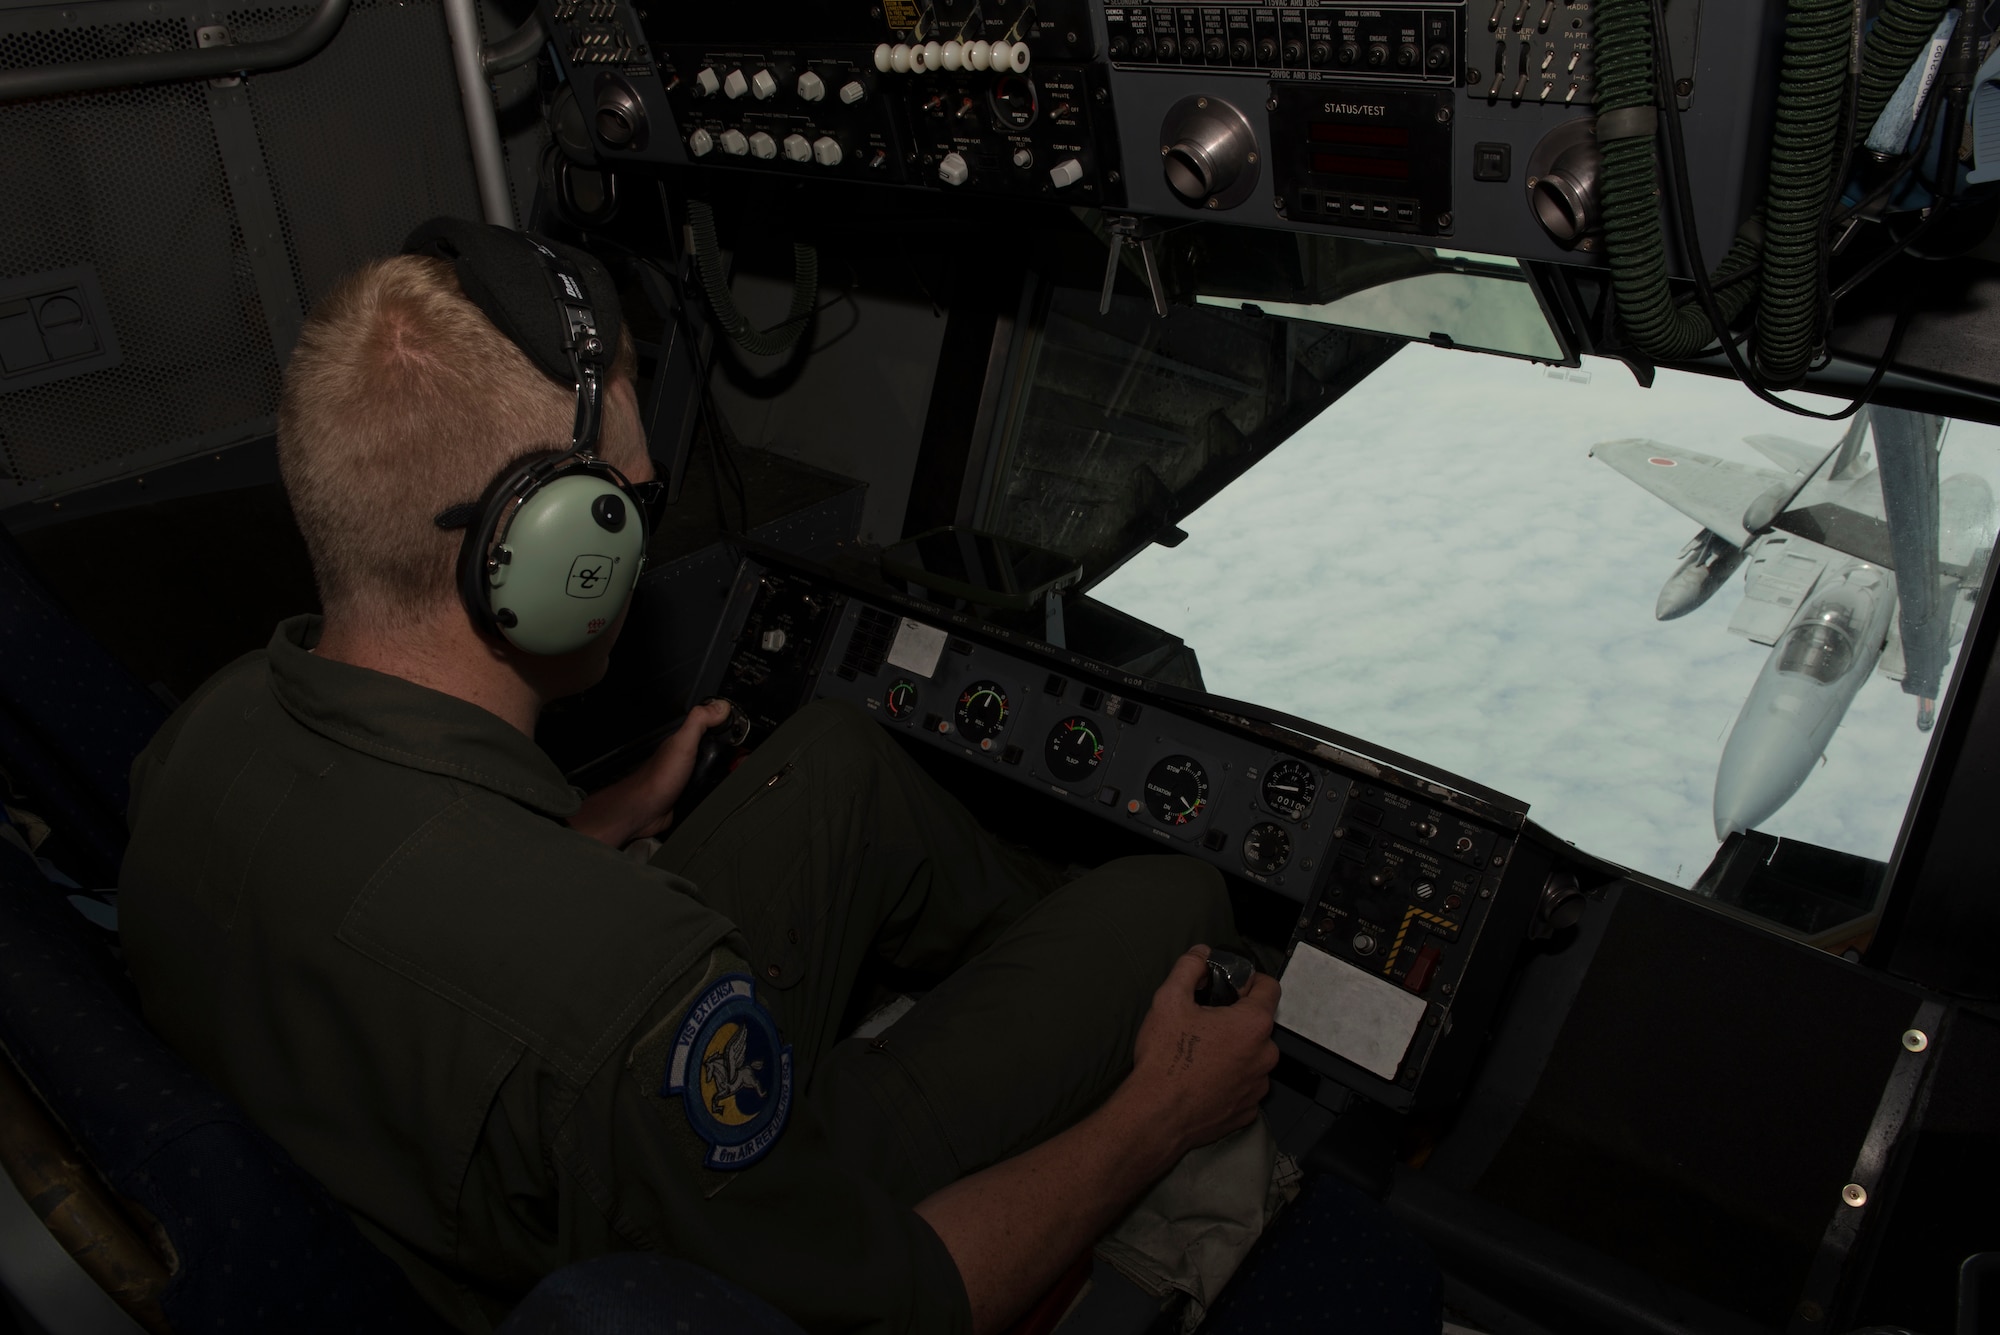 U.S. Air Force Staff Sgt. Zachariah Ploeger, 6th Air Refueling Squadron boom operator, refuels an F-15 during a mission in the Pacific theater June 4, 2018. The boom operator is responsible for ensuring safe refueling with receiver aircraft thousands of feet above the ground. Ploeger refueled eight fighter aircraft from the United States and Japan during the five-day mission. (U.S. Air Force photo by Tech. Sgt. James Hodgman)